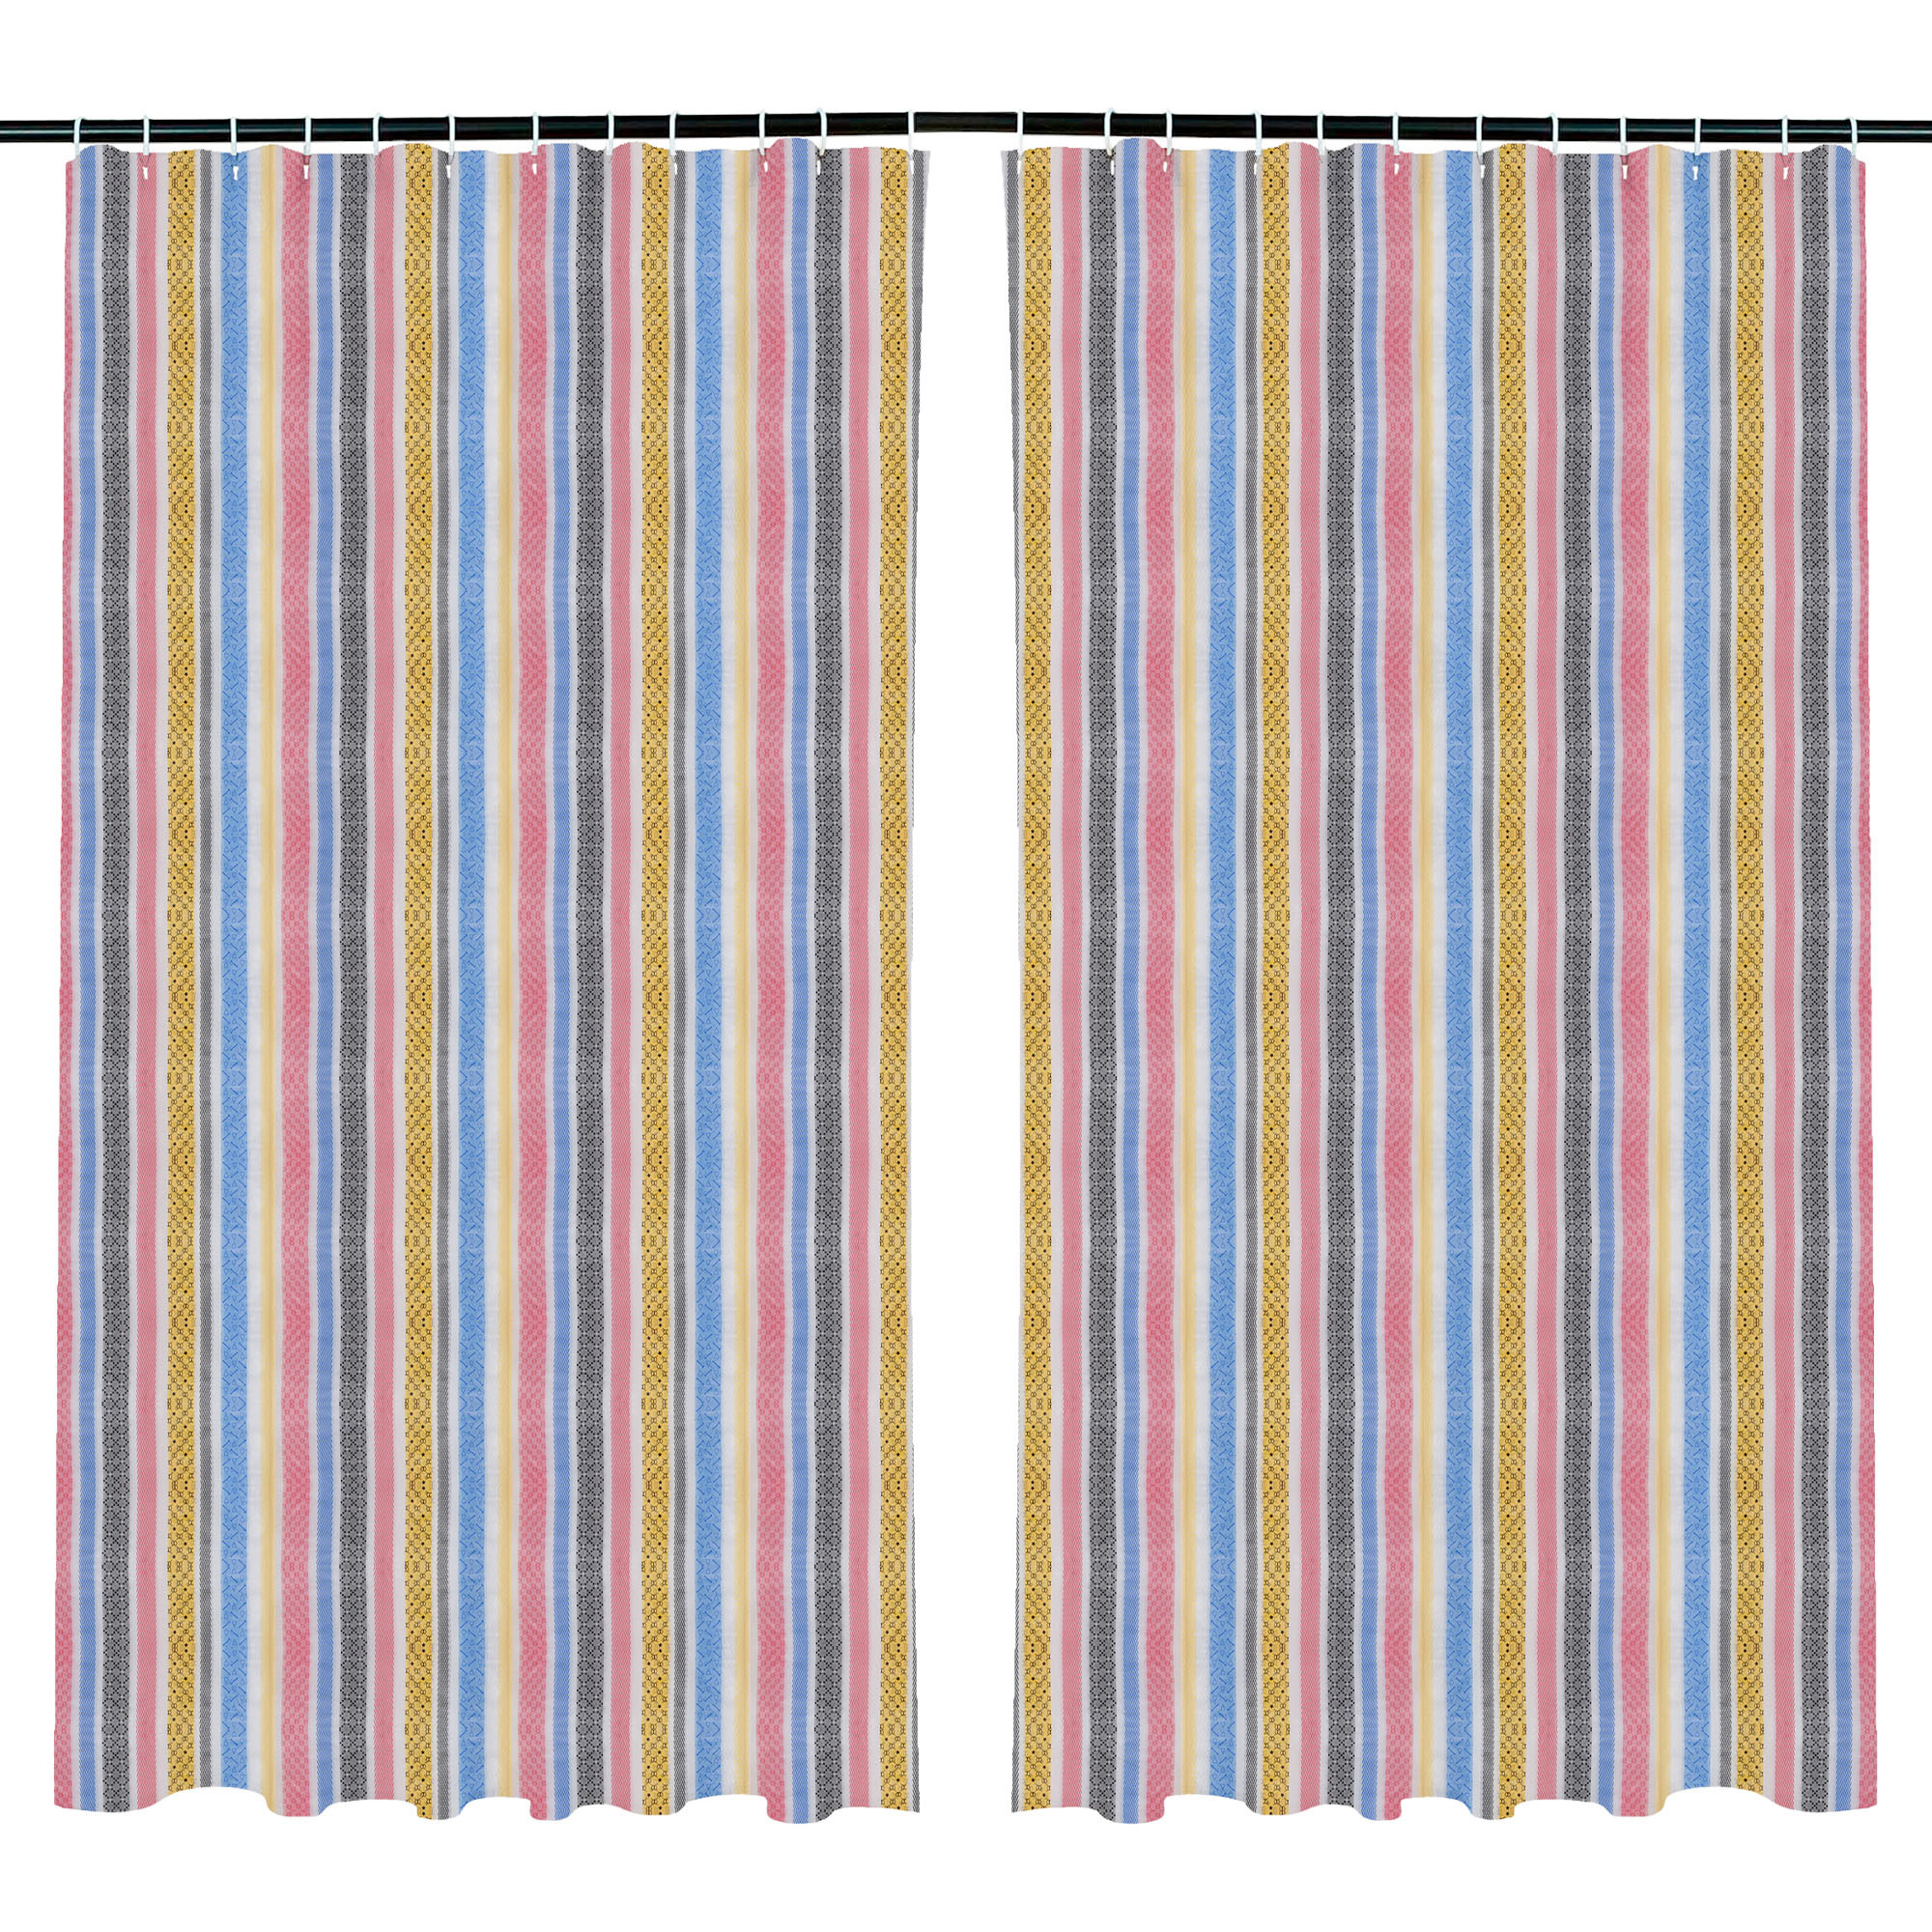 Kuber Industries AC Curtain | PVC Door Window Curtain | Curtains for Door | Lining Curtain for Bathroom | Window Blackout Curtain | Shower Curtain with 8 Rings | 7 Feet | Multicolor